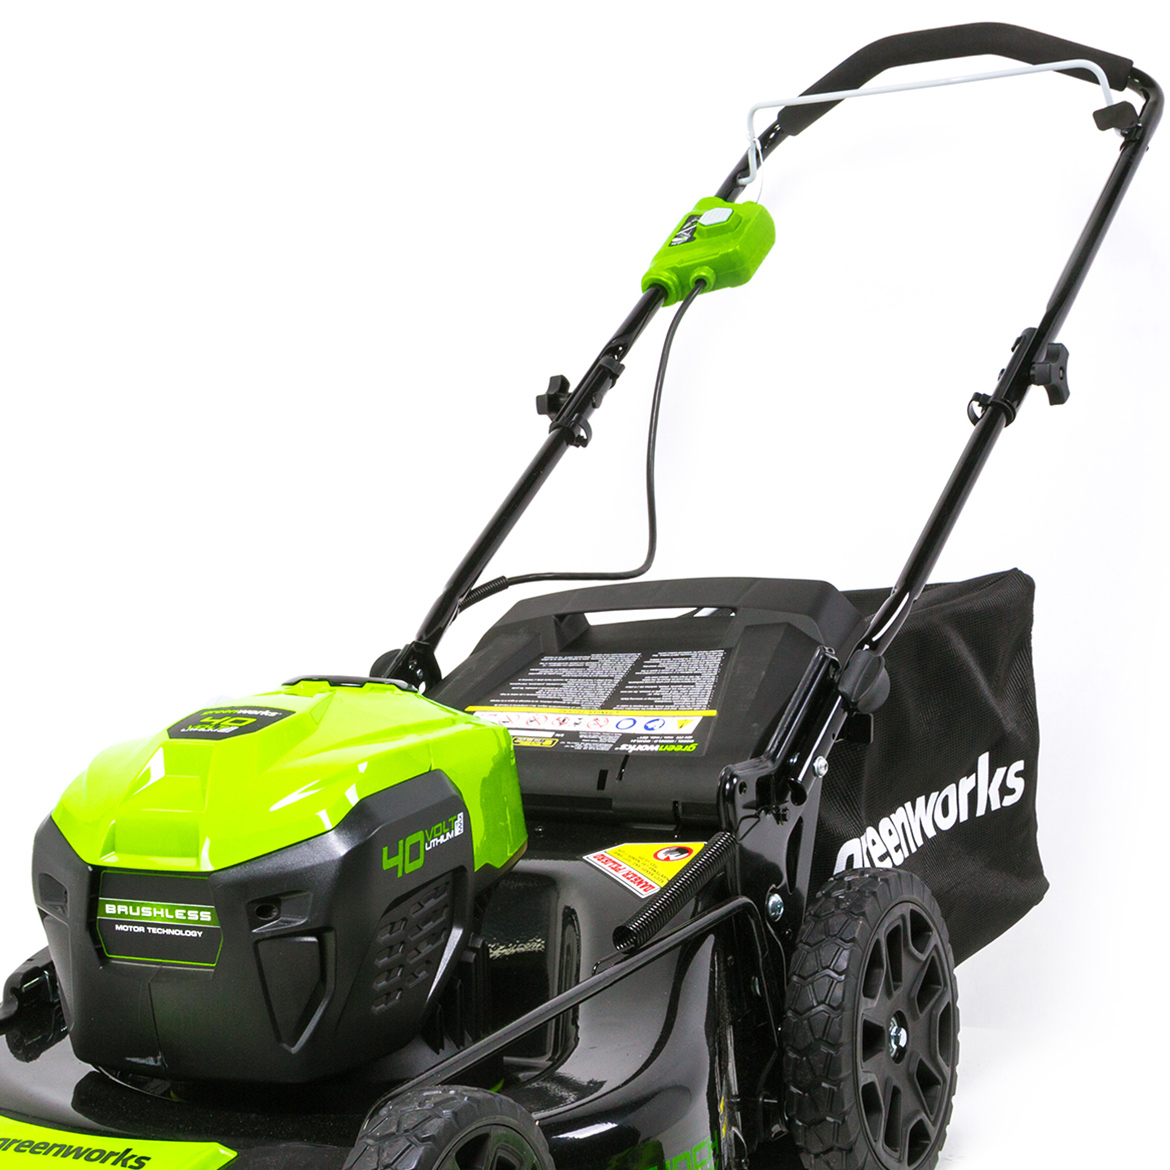 Greenworks G-MAX 40V 21 inch Brushless Dual Port Lawn Mower, Battery and Charger Not Included 2506502 - image 2 of 3